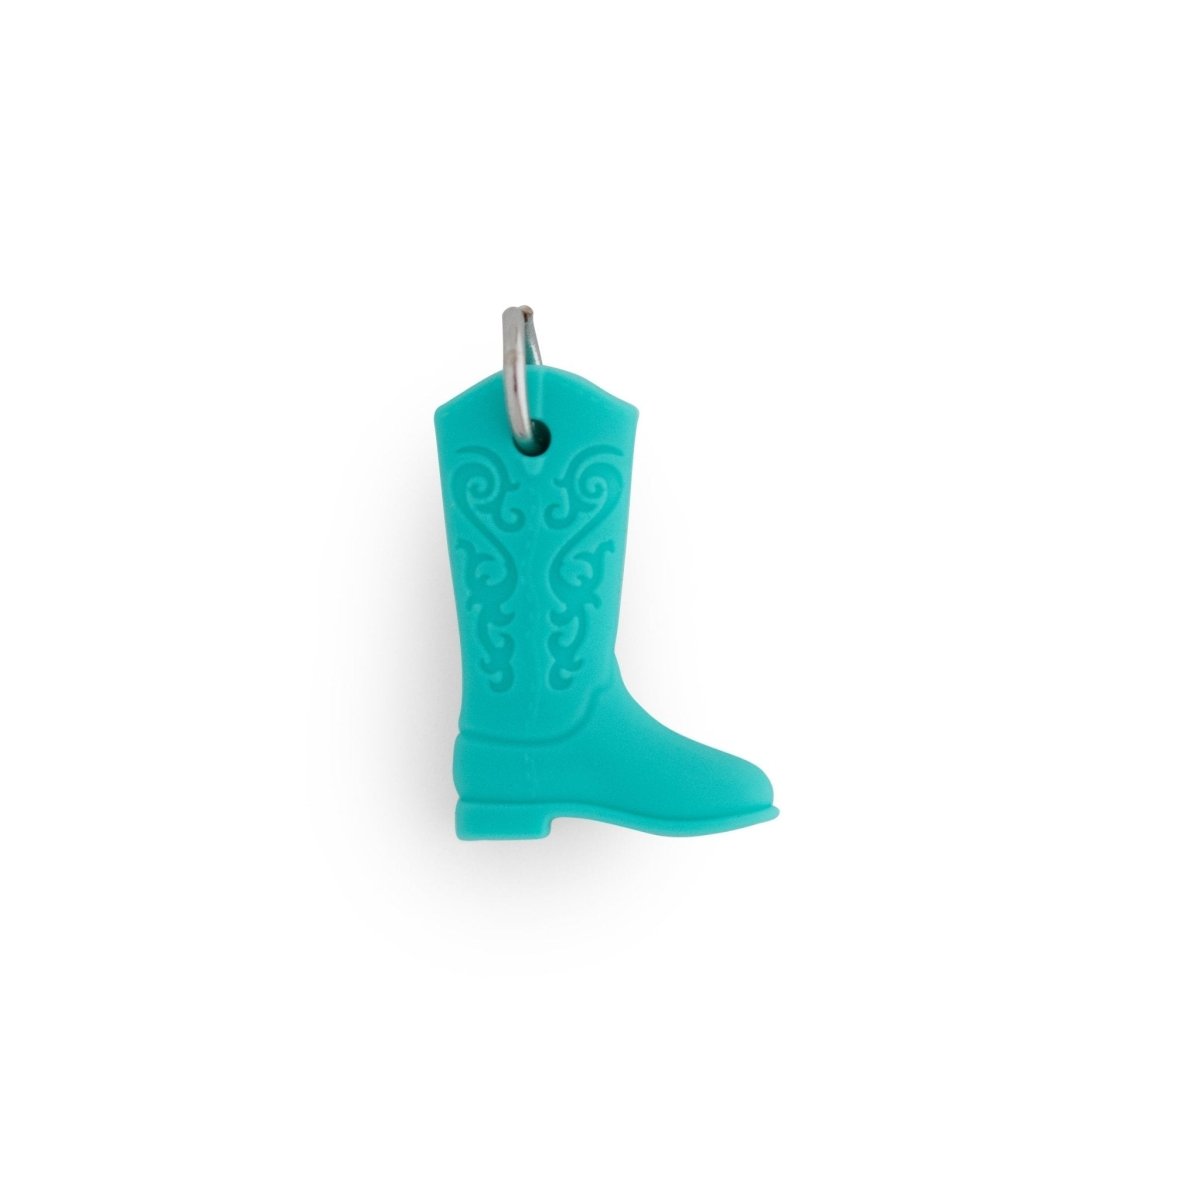 Silicone Charms Cowboy Boots Turquoise from Cara & Co Craft Supply